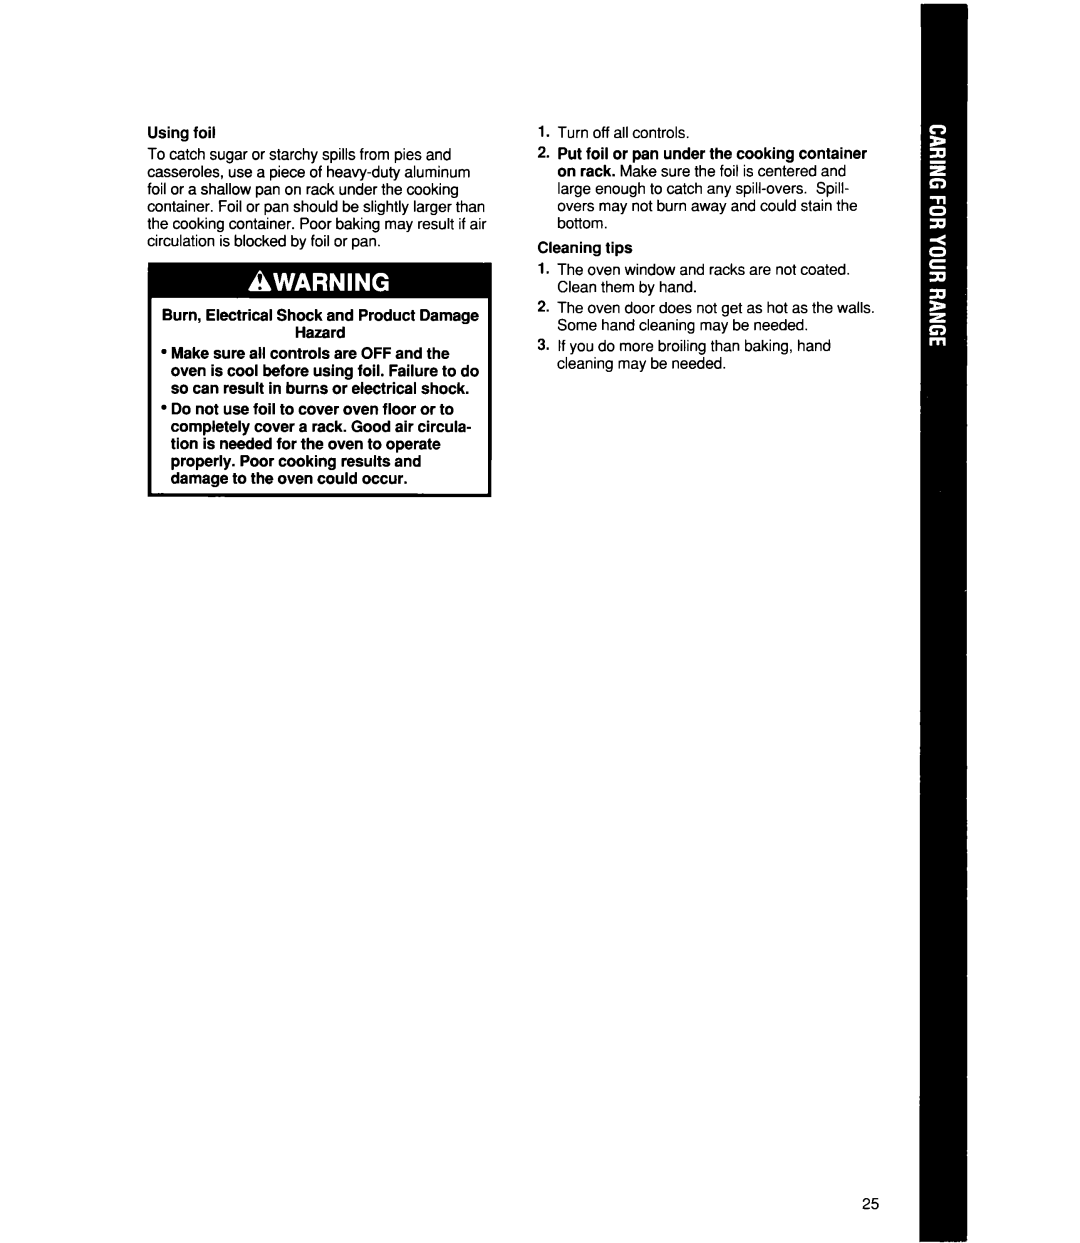 Whirlpool RF4700XW manual Using foil, Burn, Electrical Shock and Product Damage Hazard, Cleaning tips 